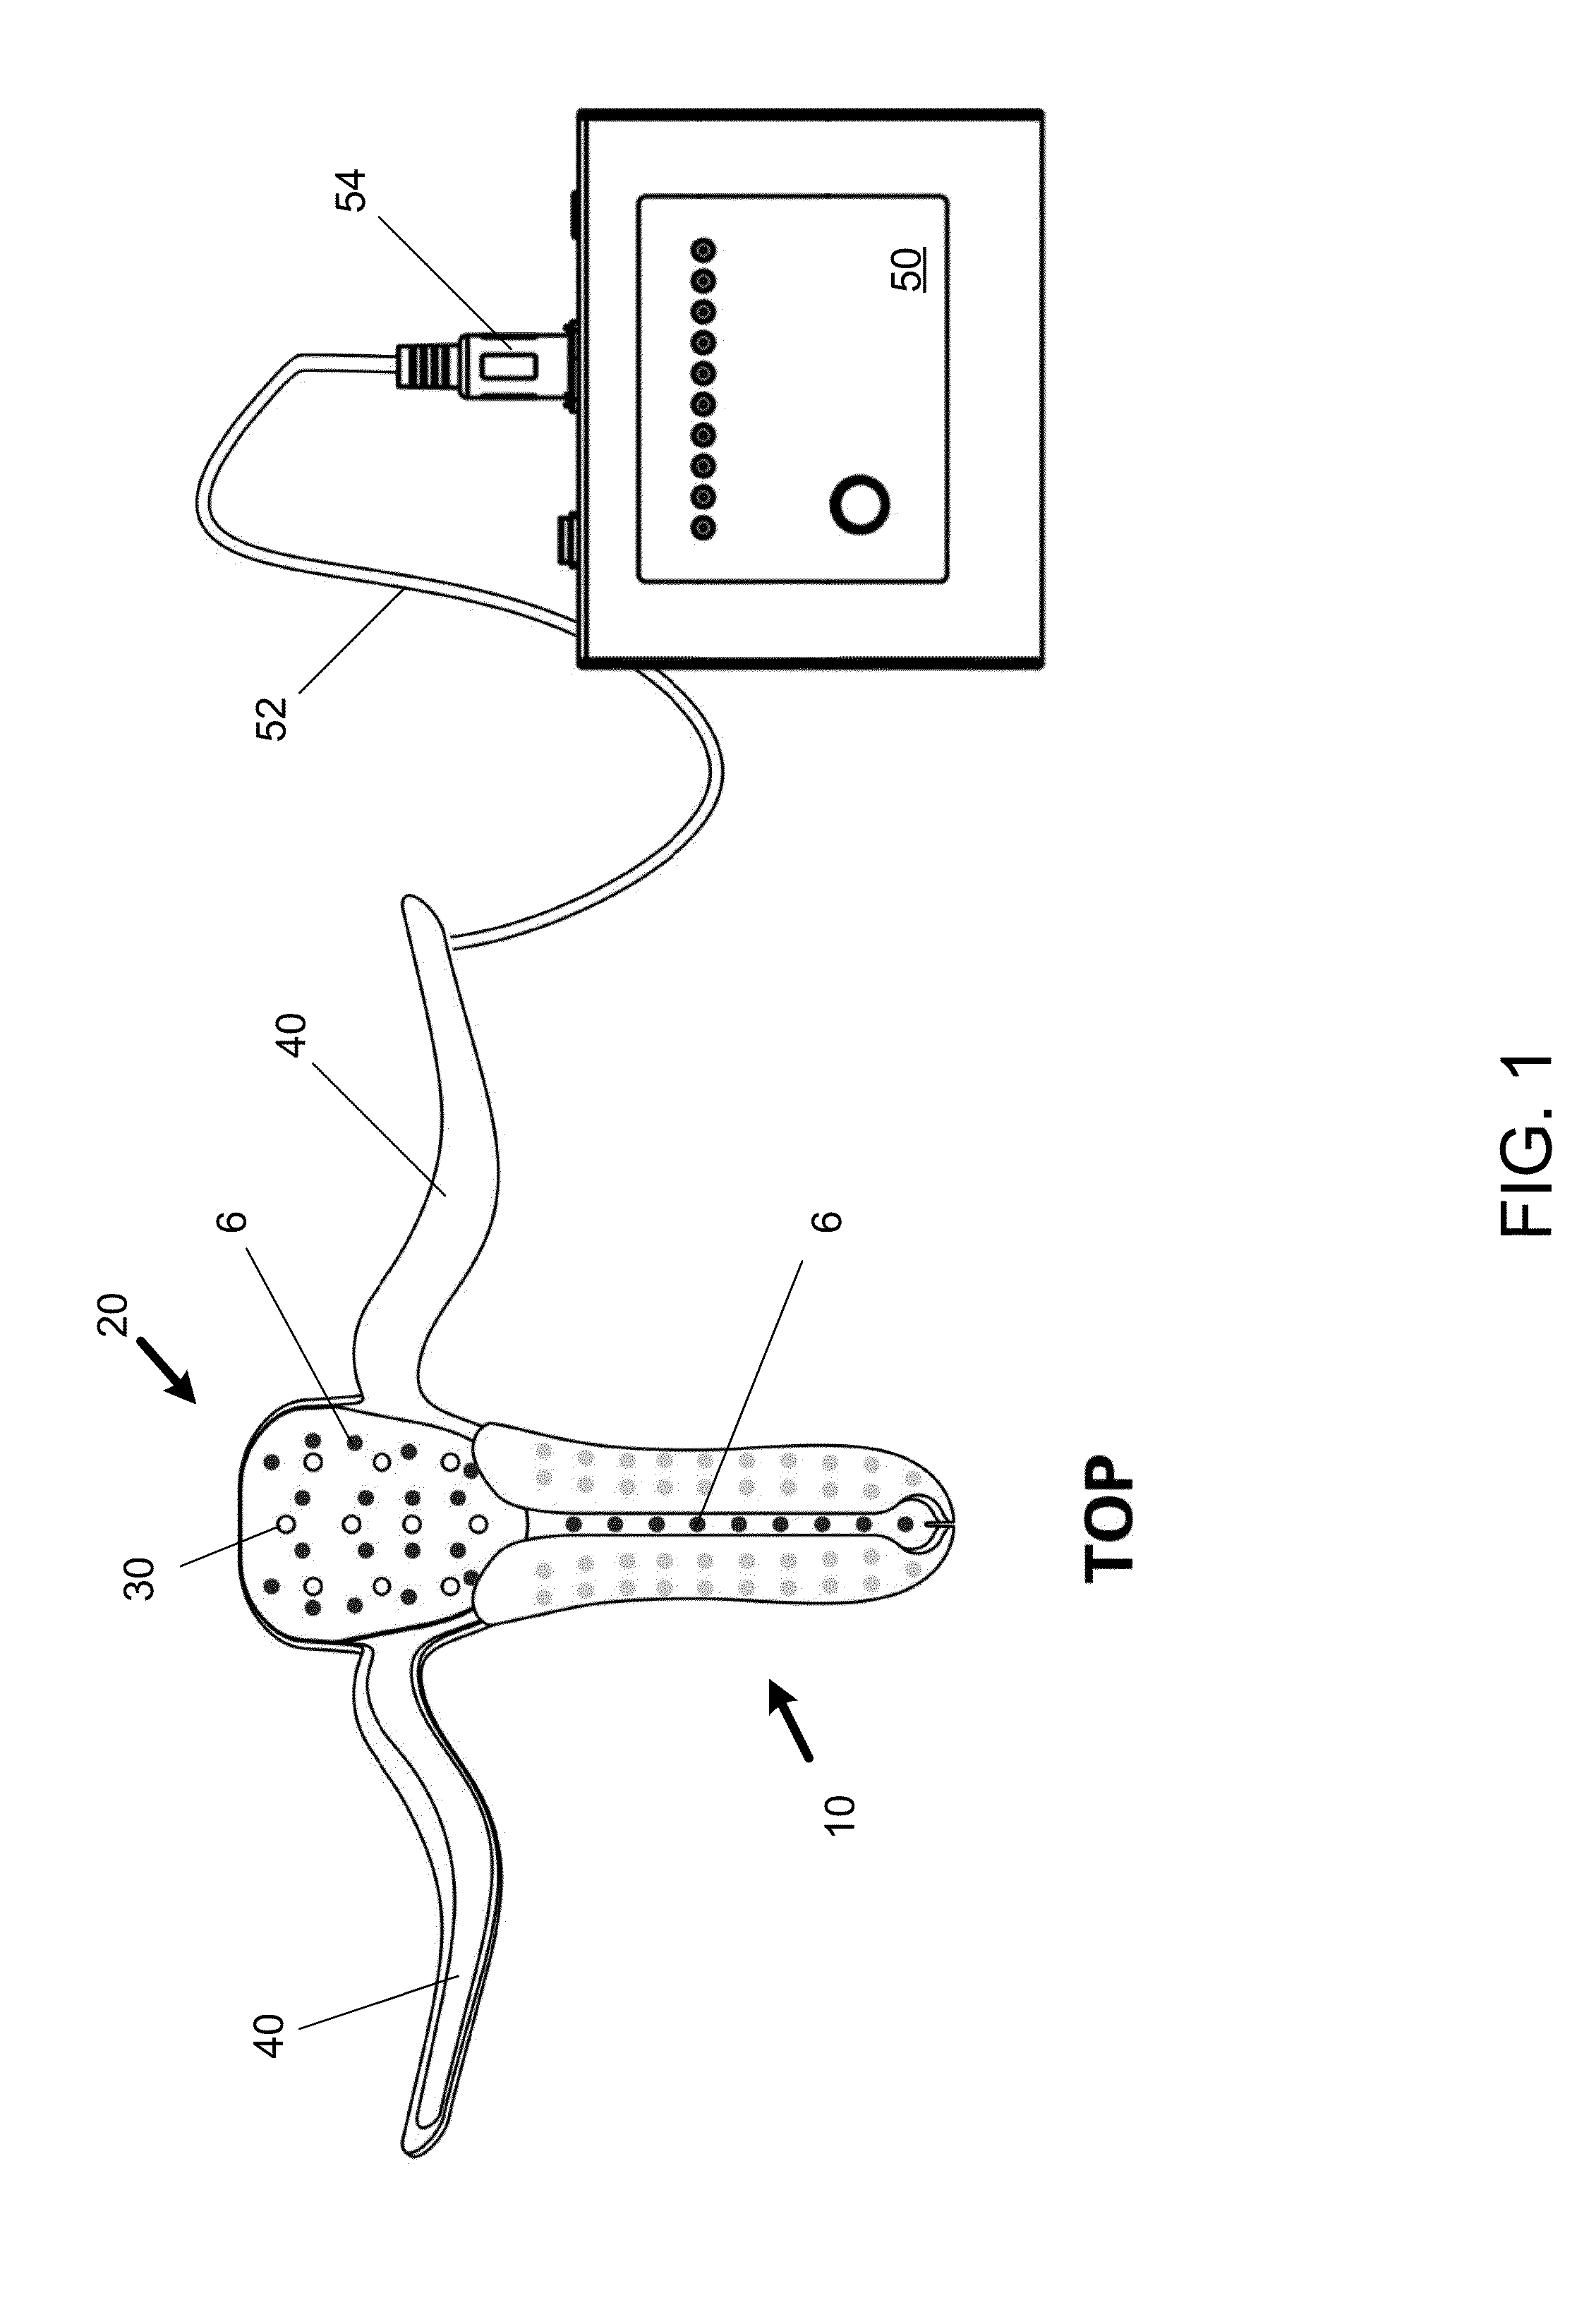 Phototherapy device